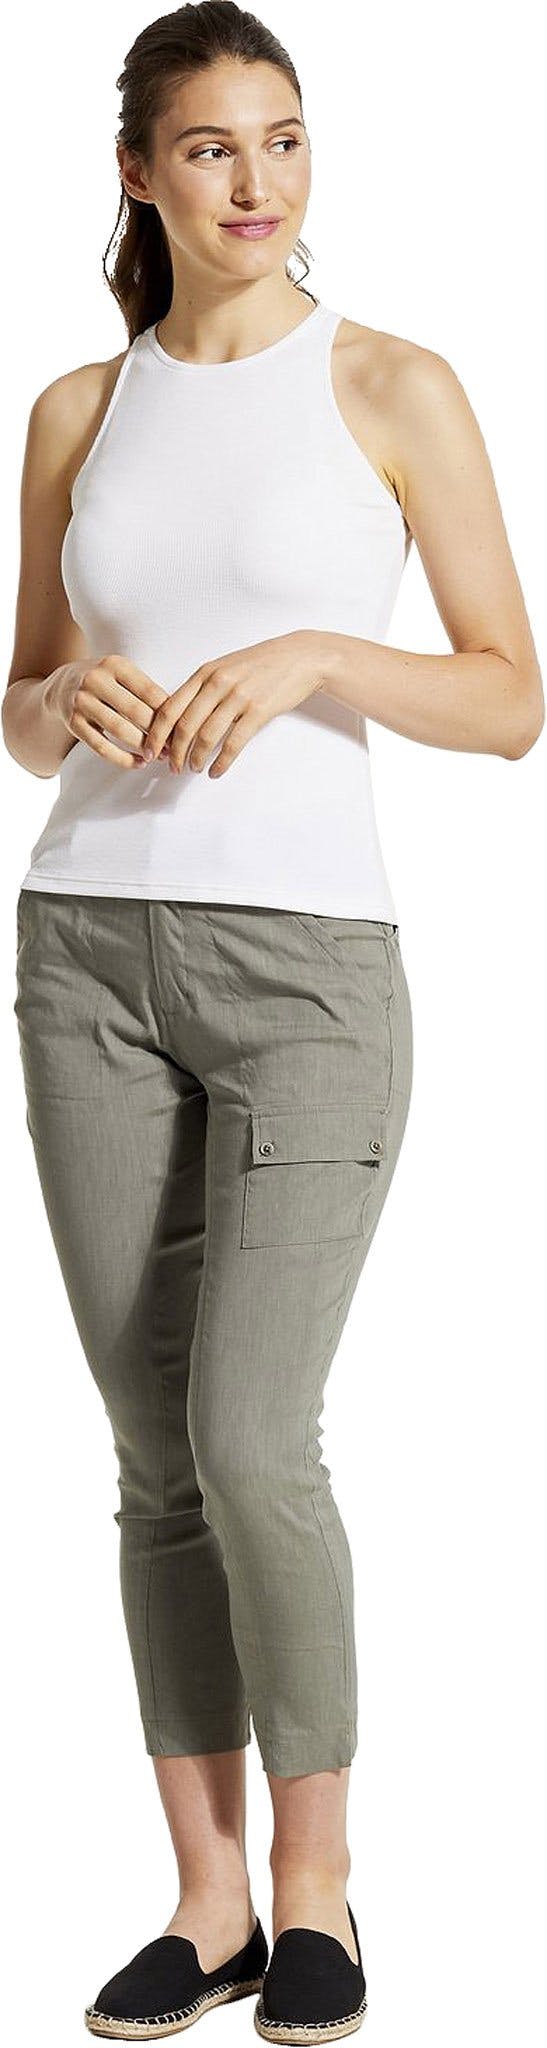 Product image for MAT Pants - Women's